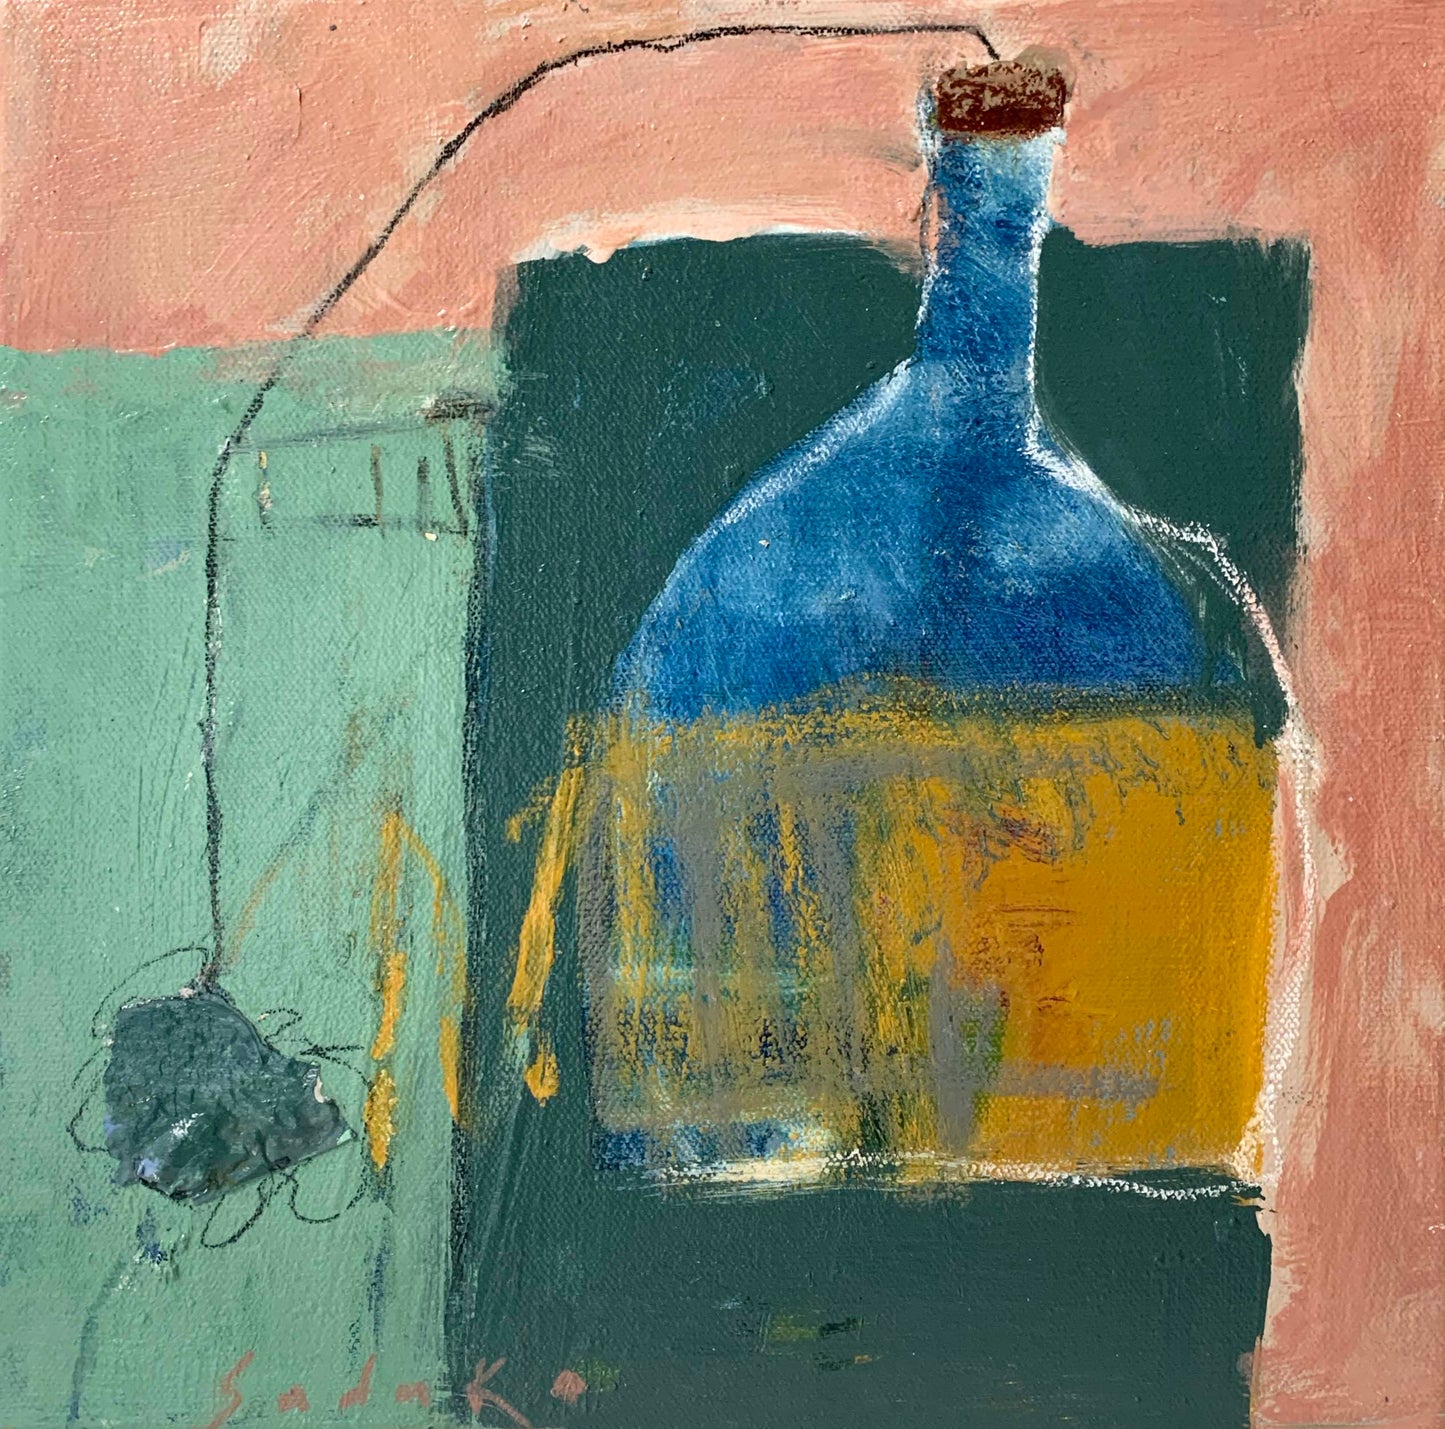 Flower with a Blue Jug